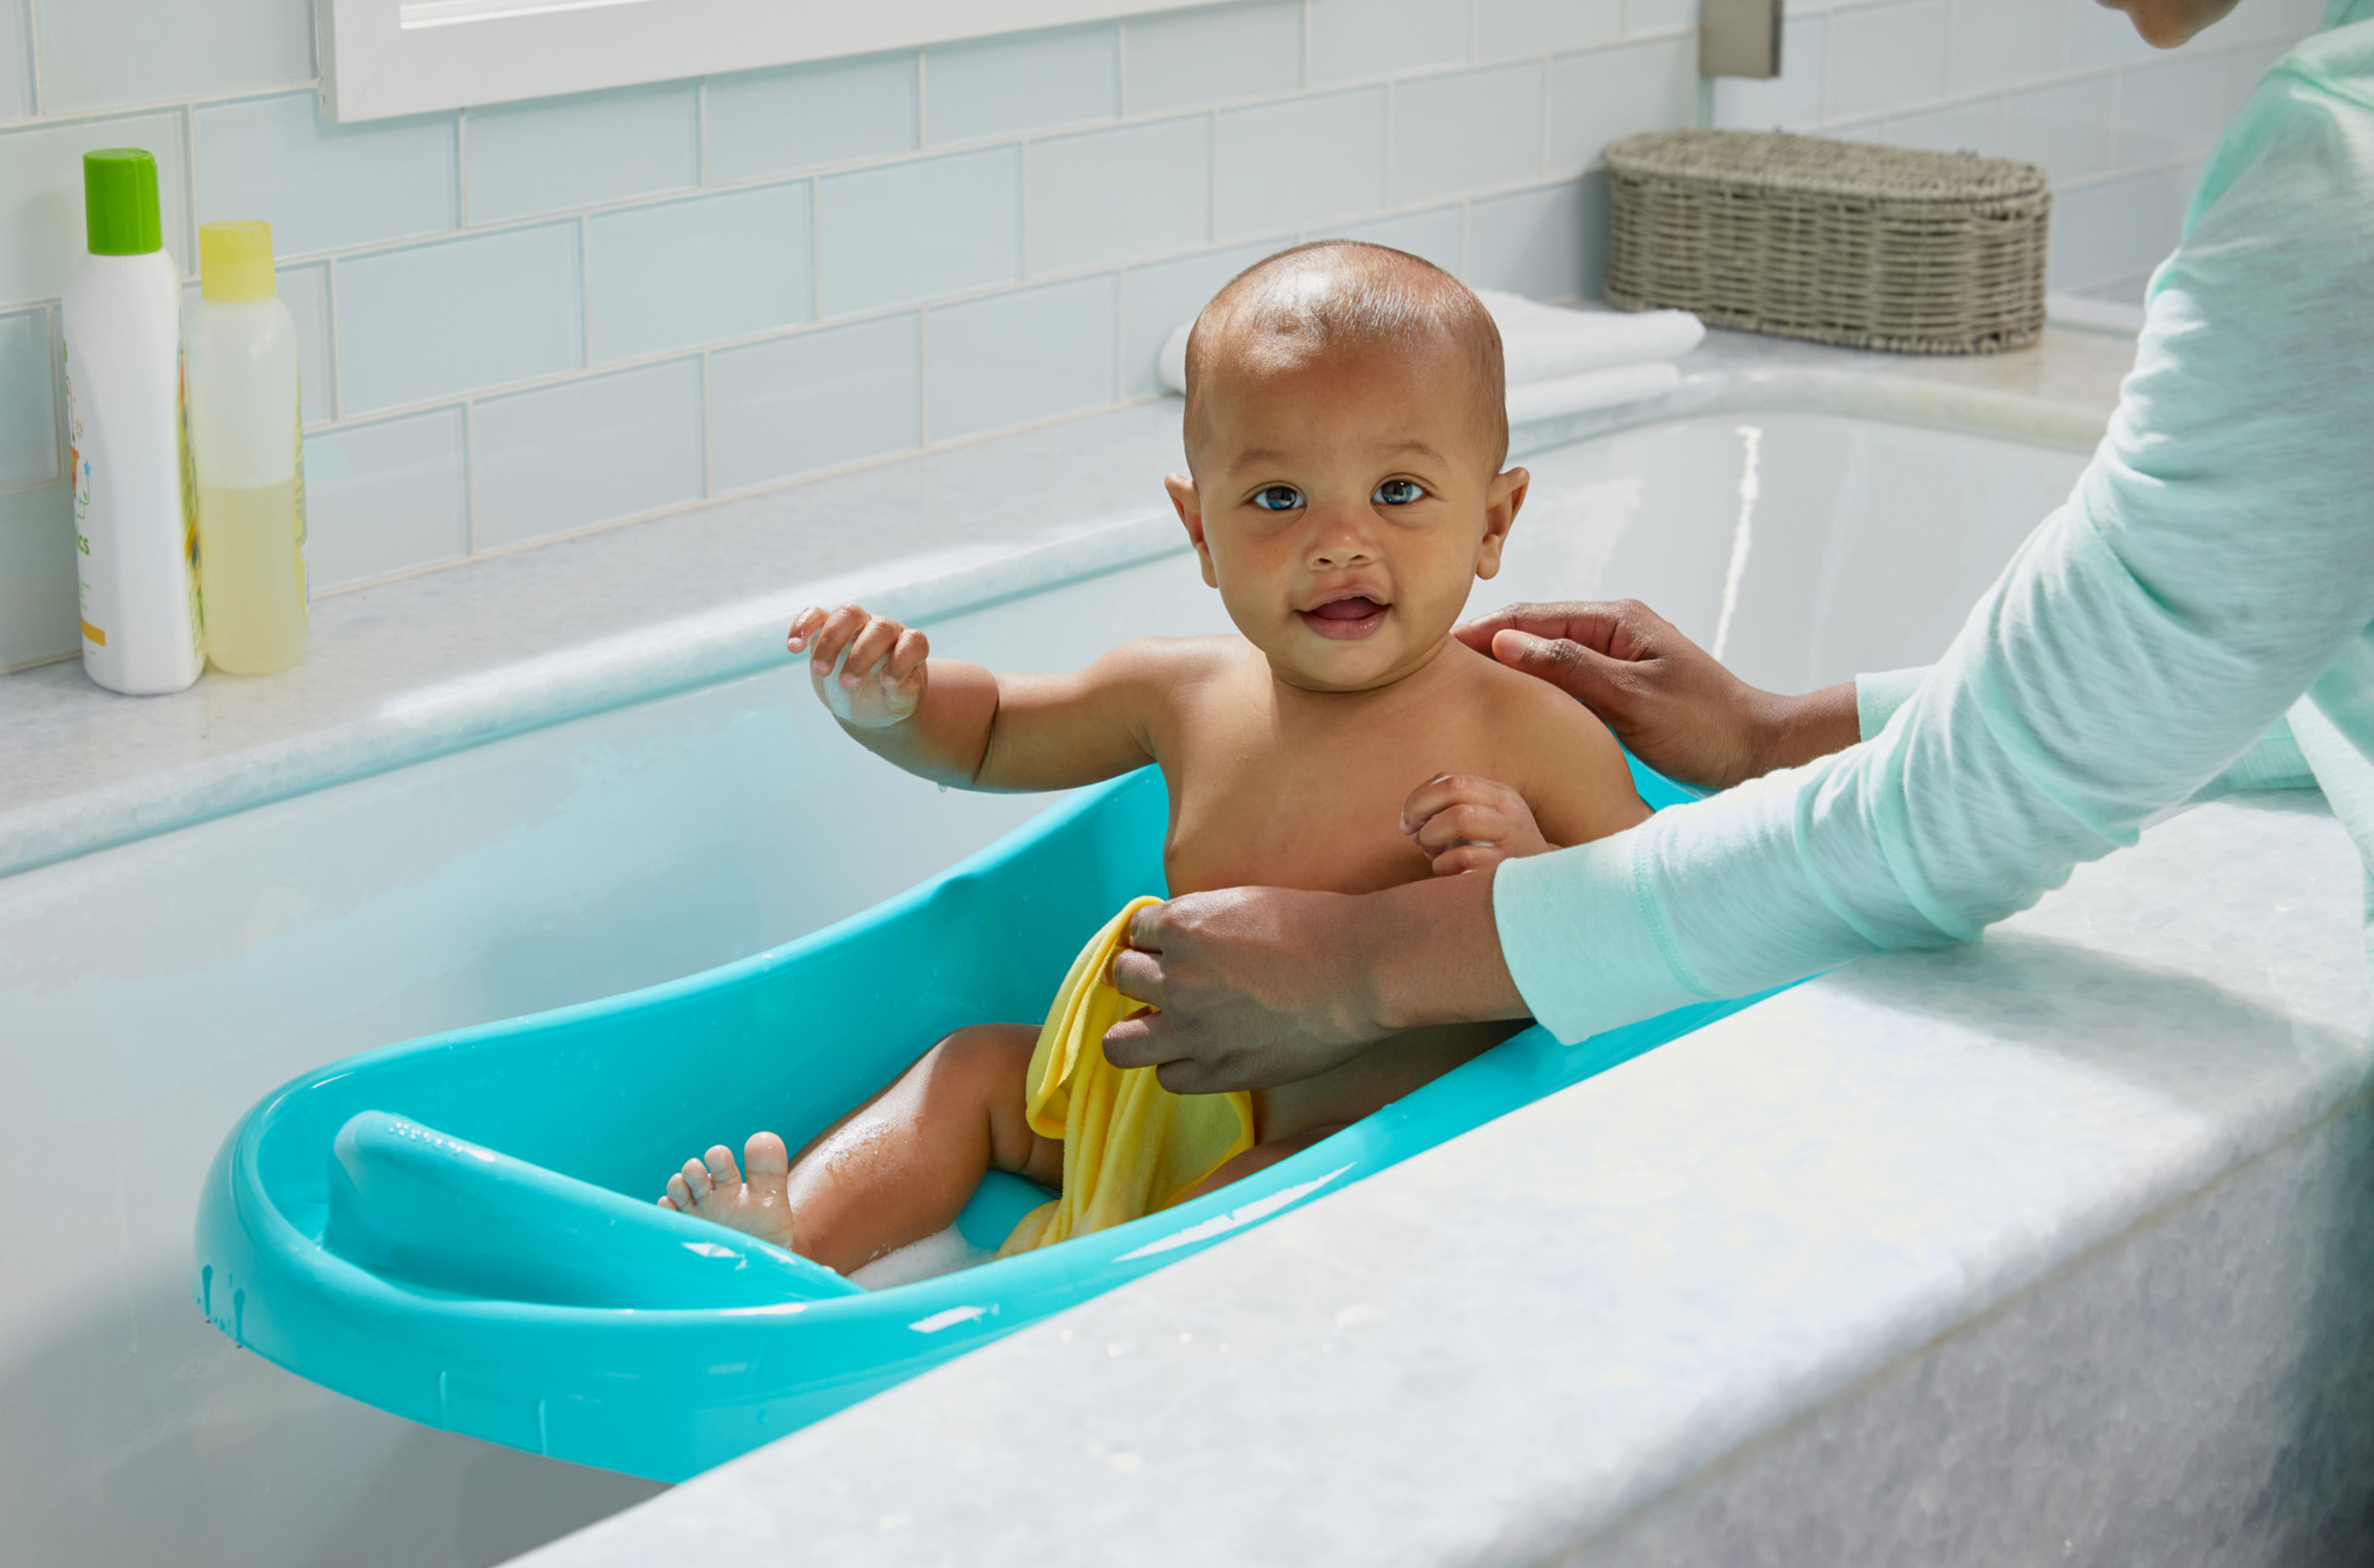 The First Years Sure Comfort Newborn to Toddler Baby Bath Tub, Infant Bath Tub, Teal - image 5 of 6